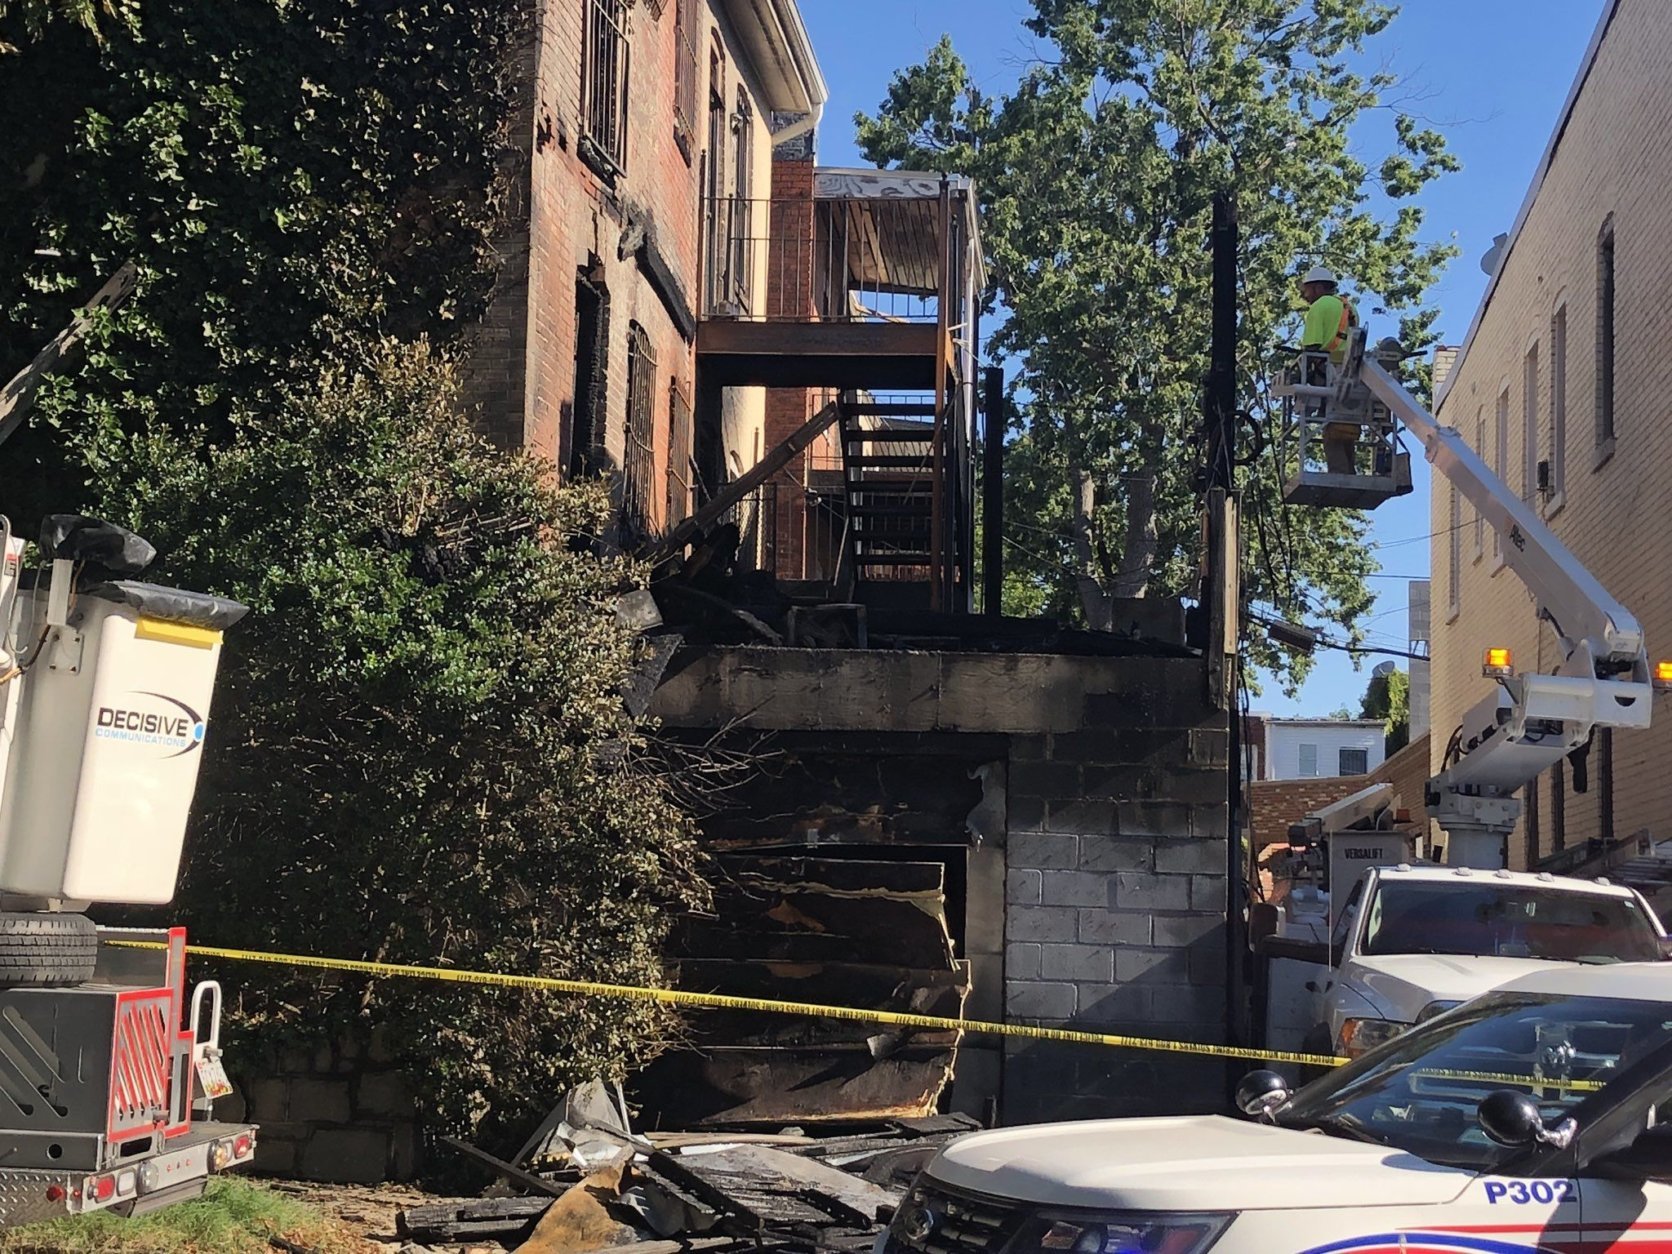 Officials say the fire began on the porch of a row house on 11th street and Columbia Road before spreading to the attached home. (WTOP/Melissa Howell)